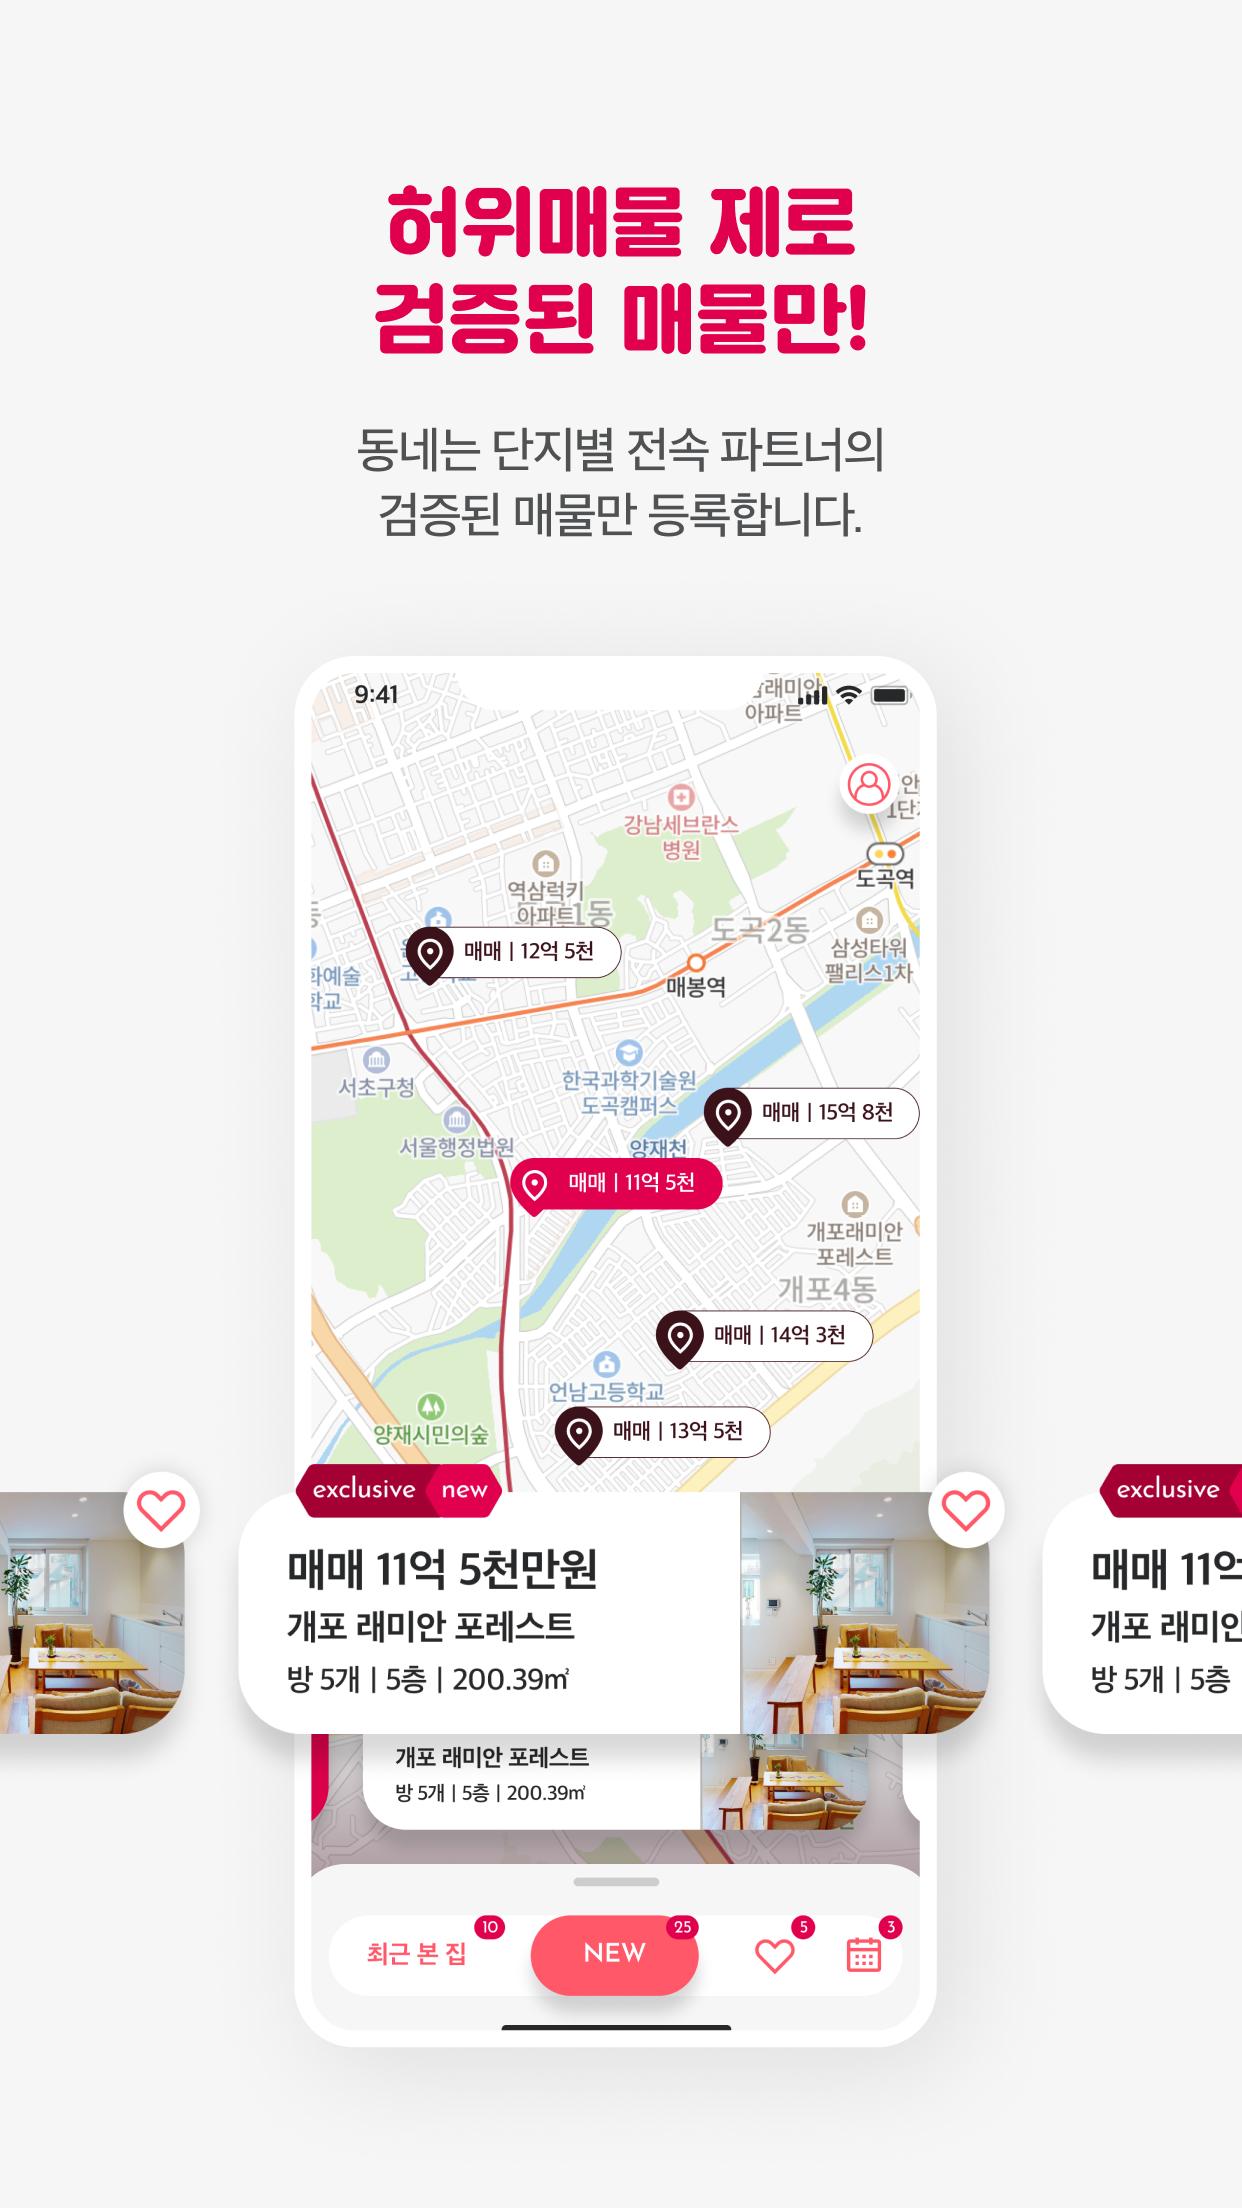 Dongnae Real Estate: Find Your Home 1.0.2 Screenshot 8